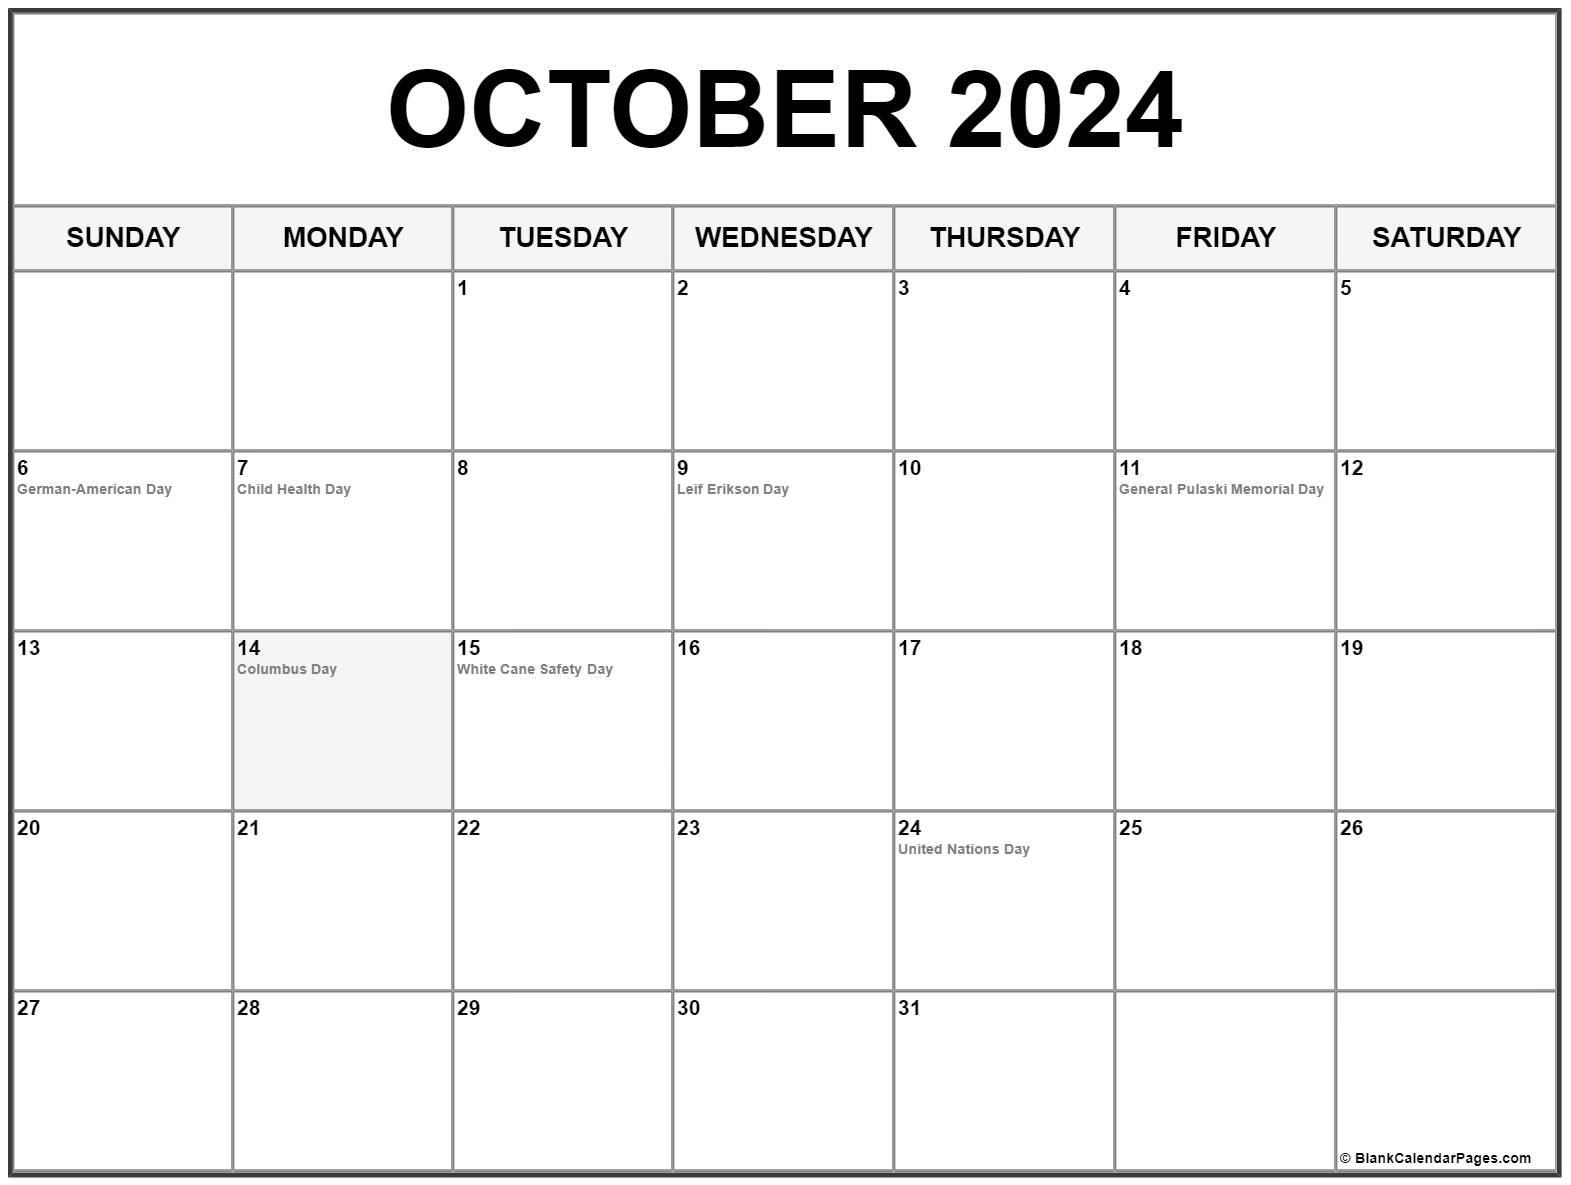 Calendar October 2024 With Holidays Free Printable 2024 Calendar With - Free Printable 2024 Calendar Augustt September October